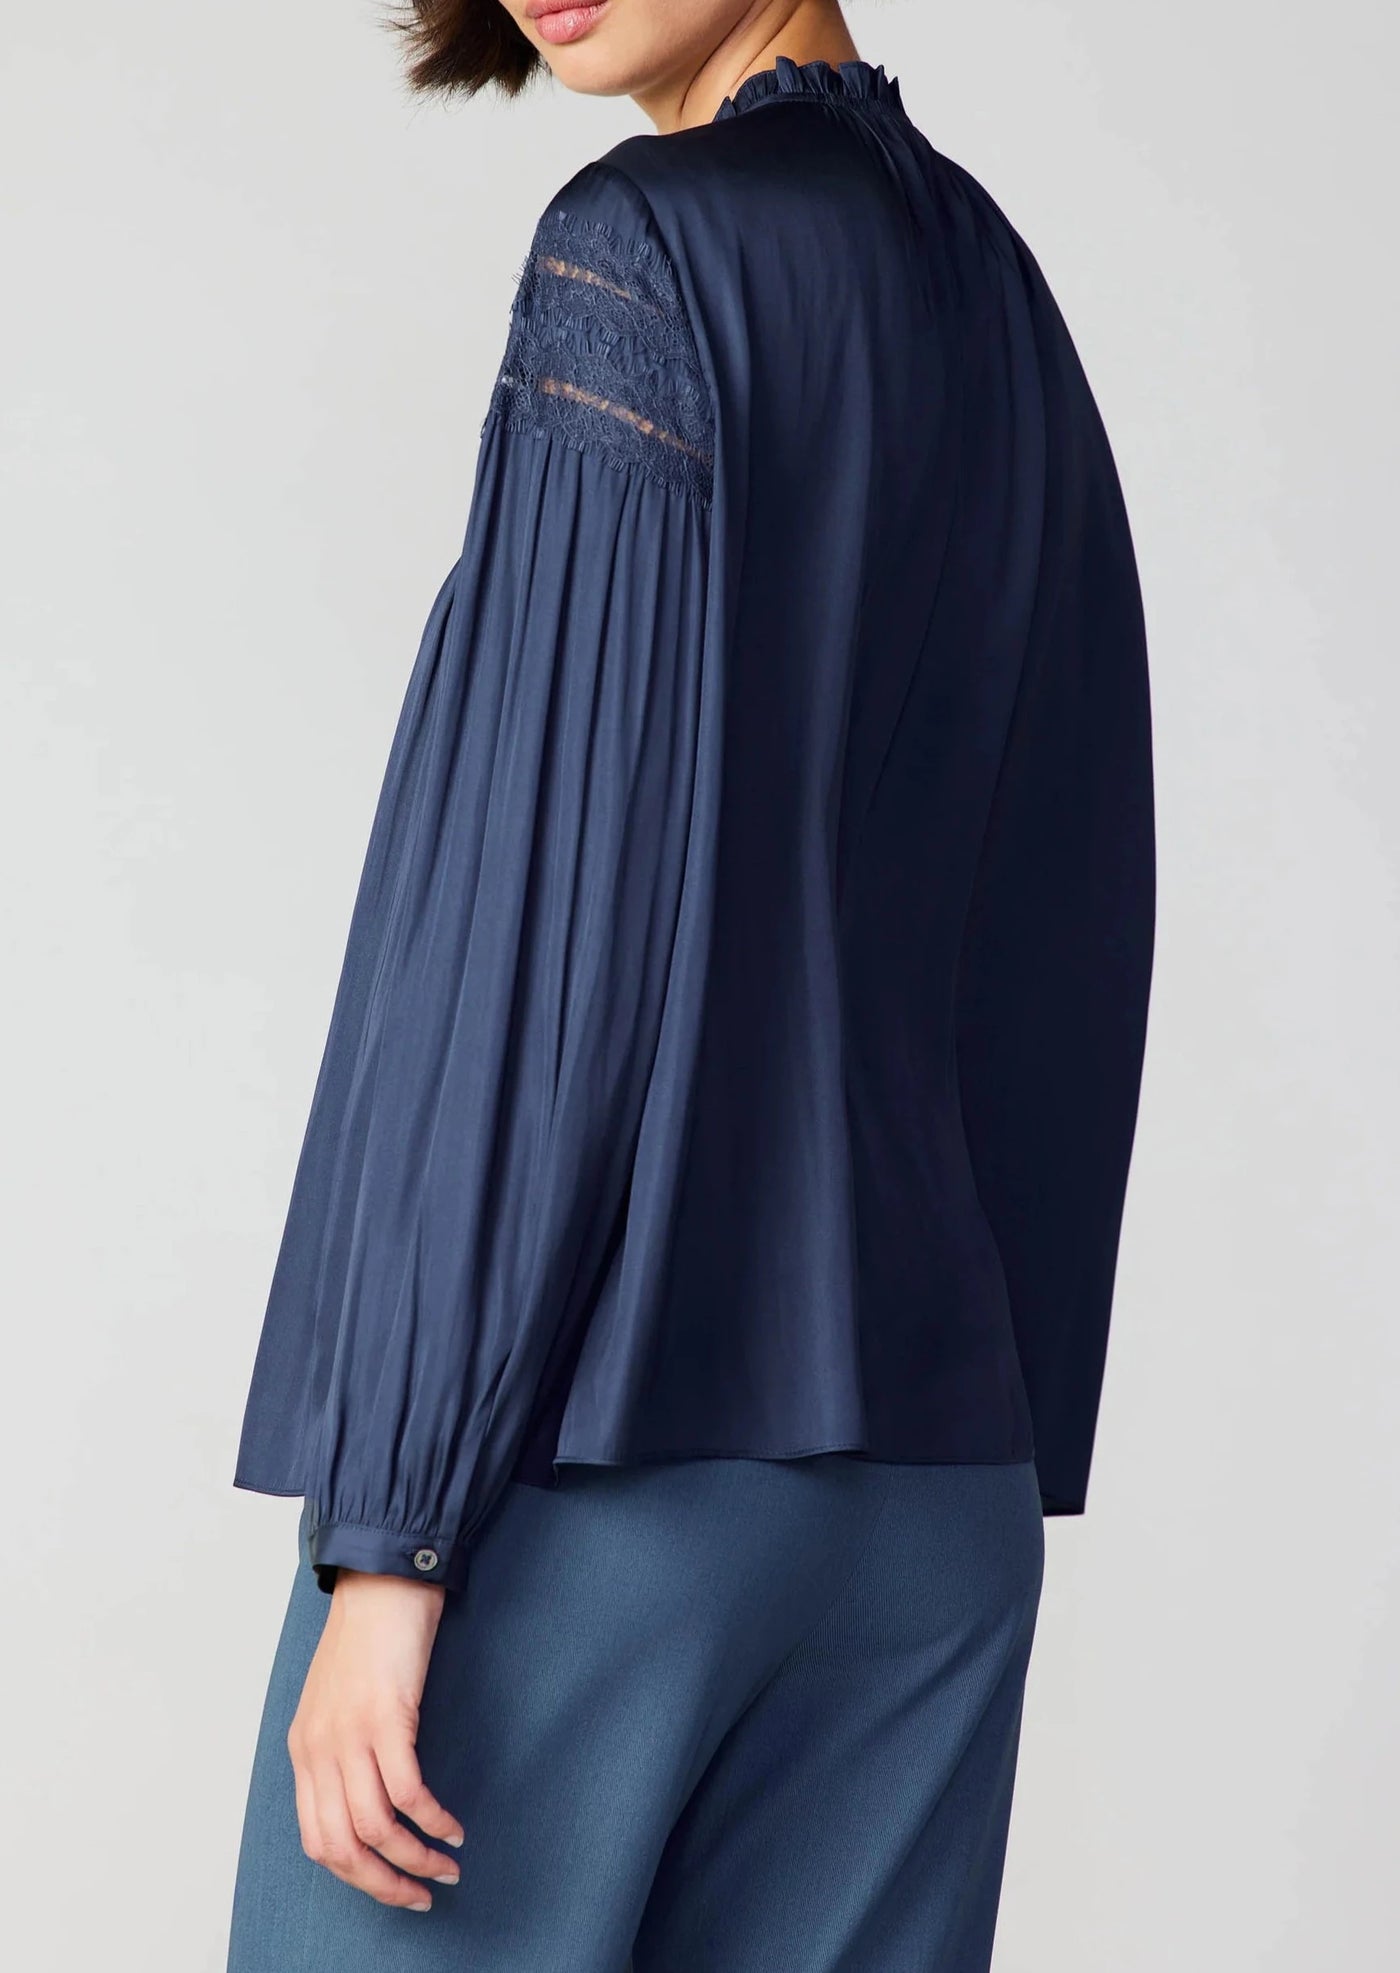 The Pink Door Band Collar Lace Insert Blouse - Slate Navy